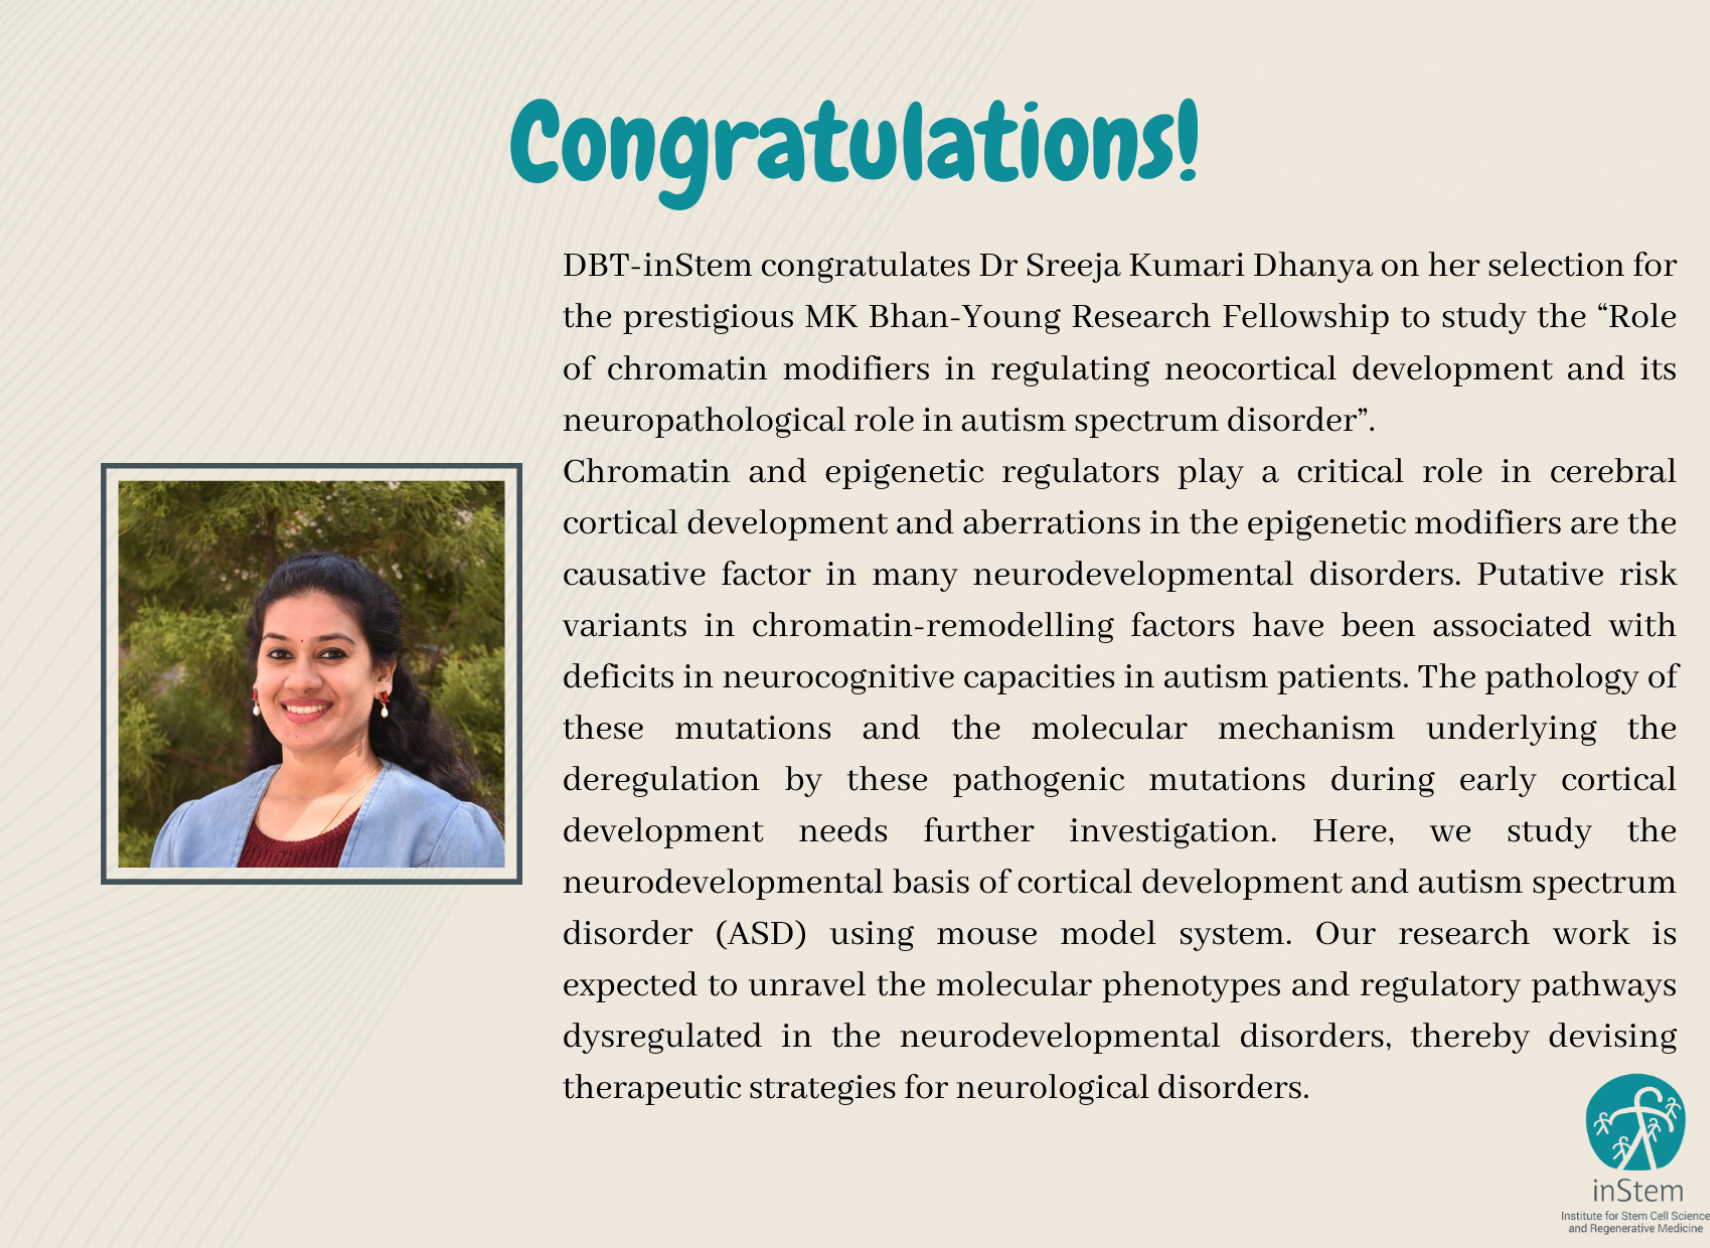 Poster congratulating Dr Sreeja Kumari Dhanya along with her picture and abstract